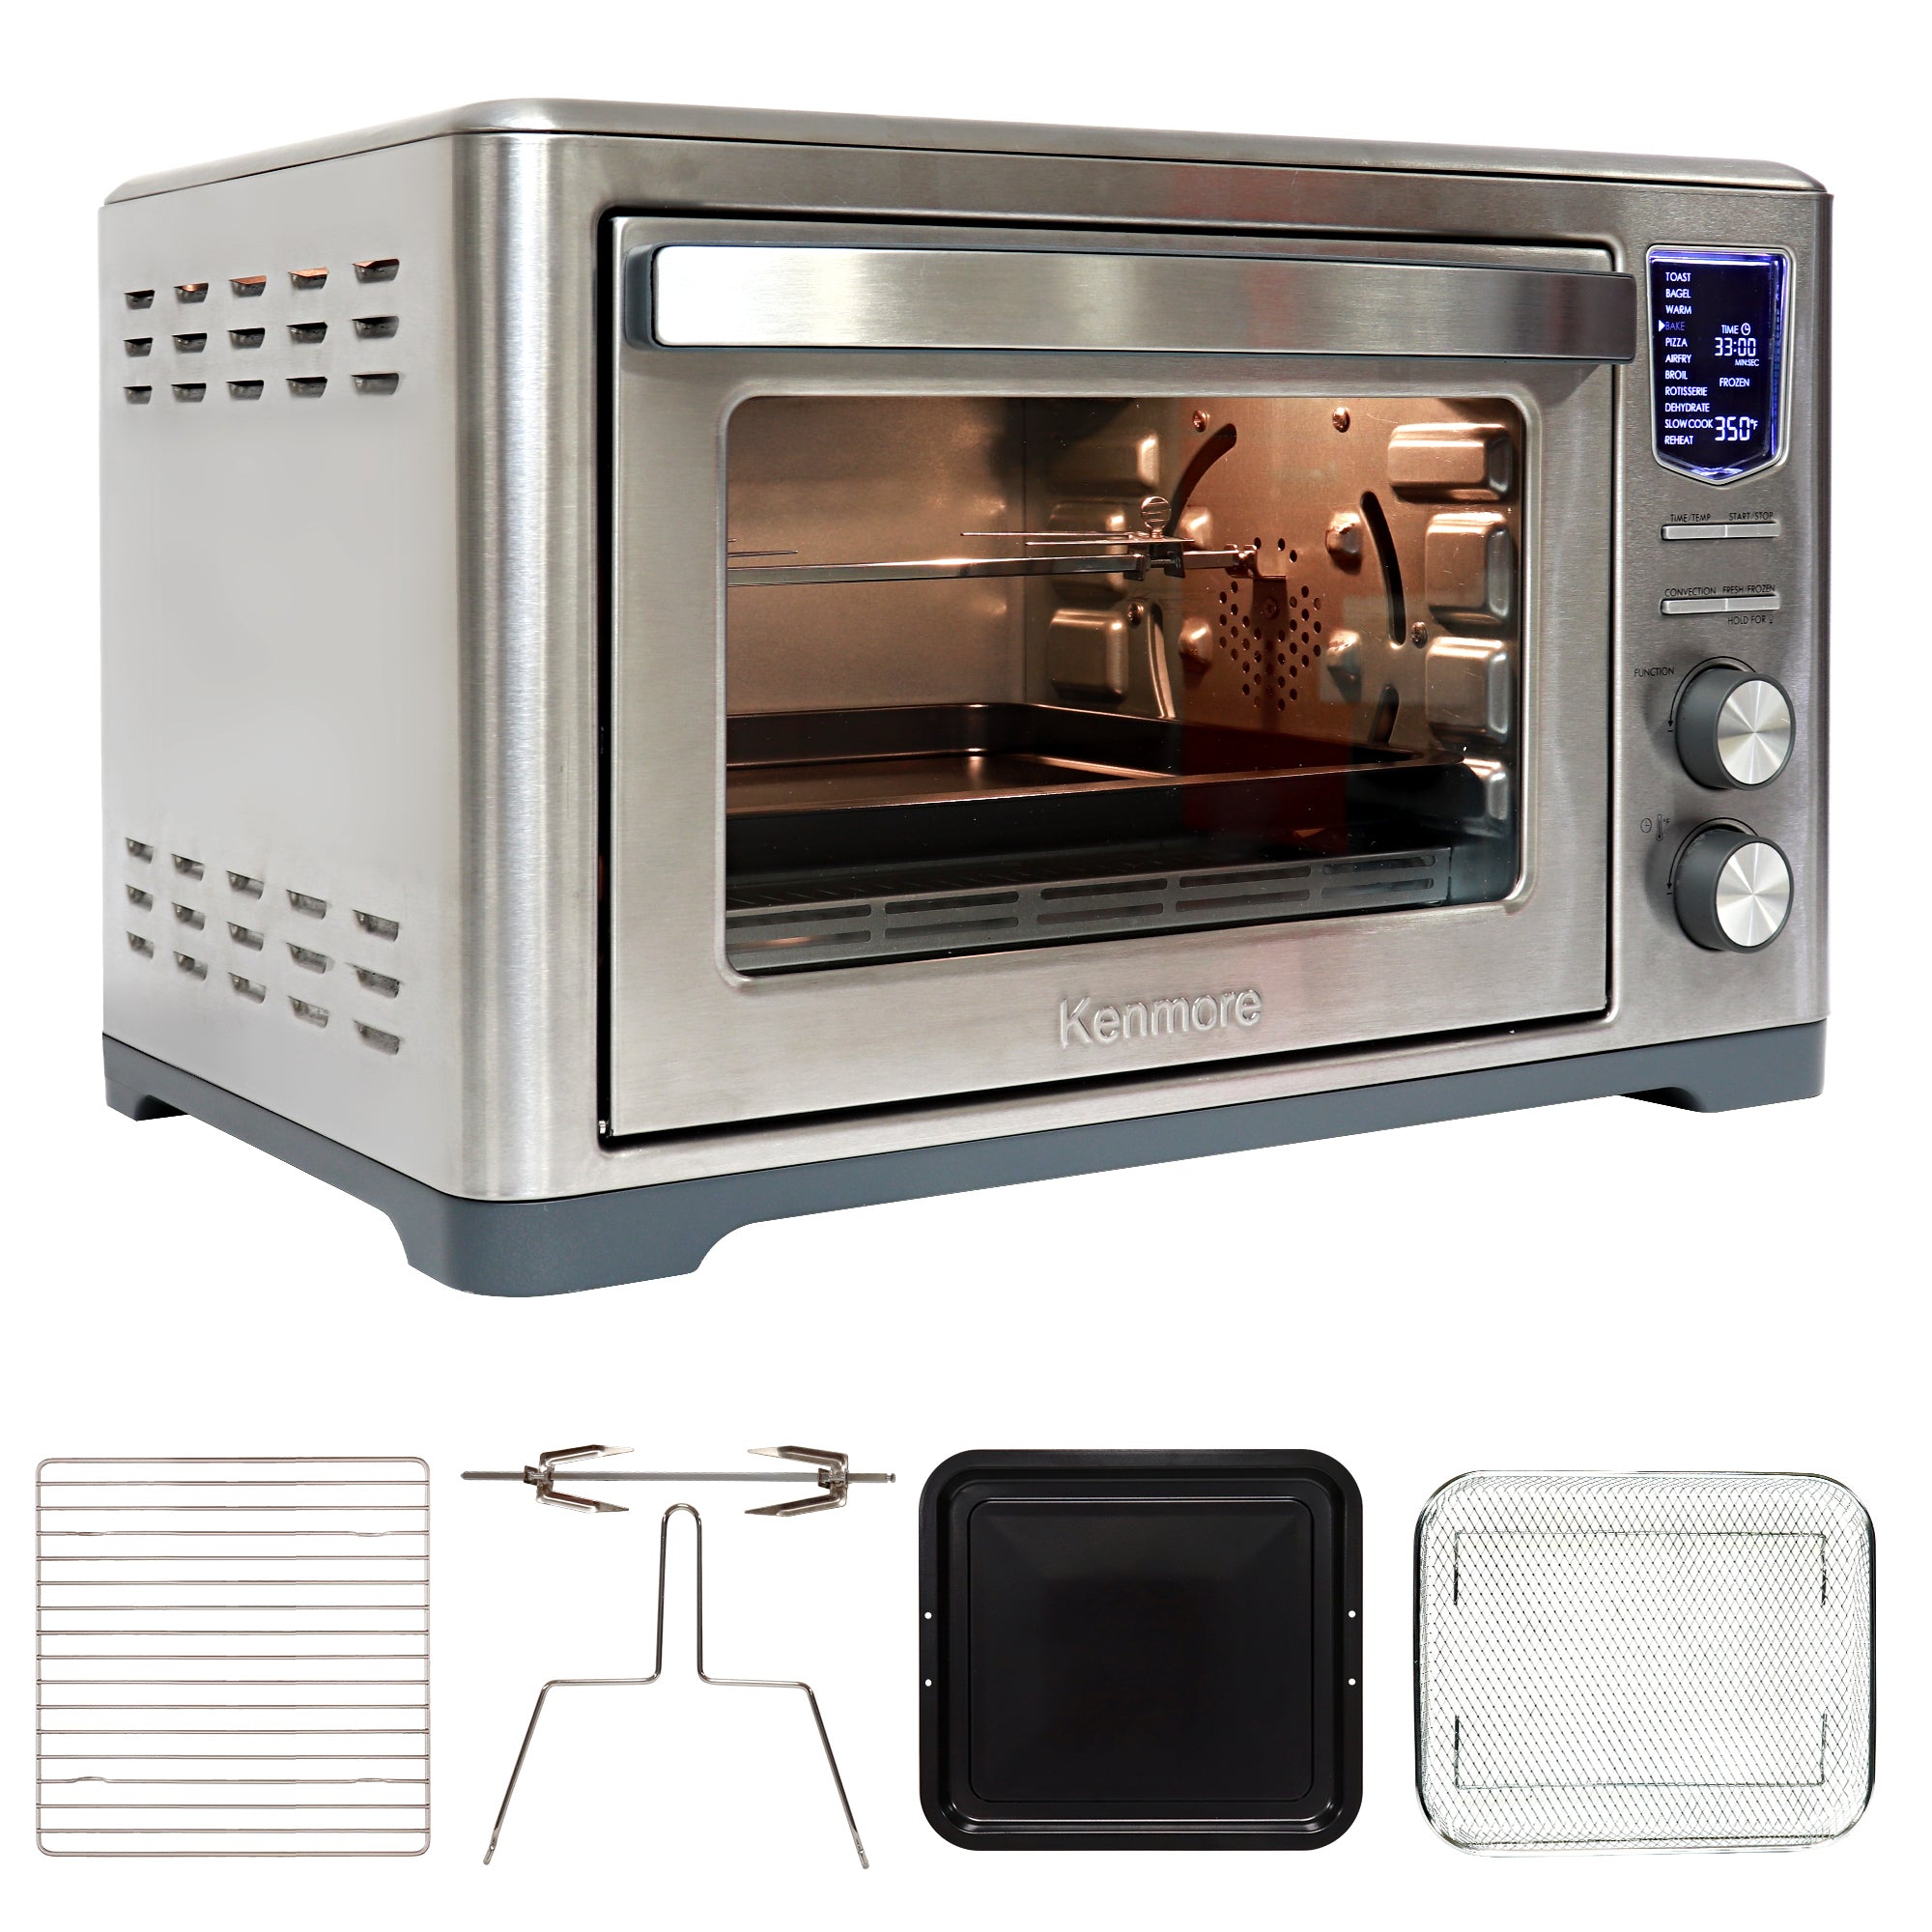 Kenmore 25 qt Digital Toaster Oven Air Fryer Rotisserie, empty and closed, on a white background with pictures of accessories (wire rack, dehydrator basket, baking pan, and rotisserie spit and handle) below